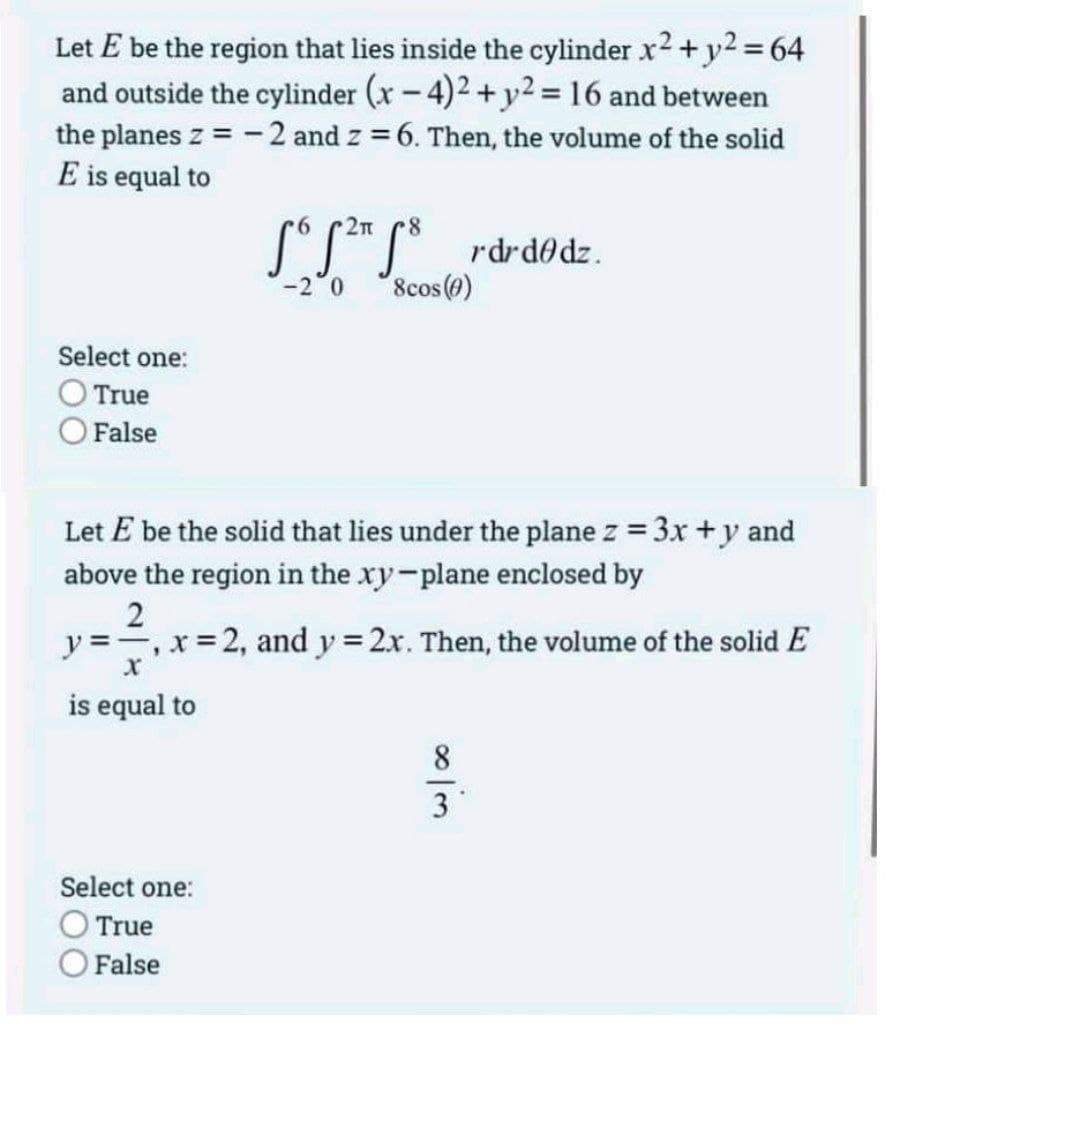 Let E be the region that lies inside the cylinder x2 + y2 = 64
and outside the cylinder (x-4)2+ y2 = 16 and between
the planes z = -2 and z = 6. Then, the volume of the solid
E is equal to
S°S**S* rdrd@dz.
8cos (@)
-2 0
Select one:
True
O False
Let E be the solid that lies under the plane z = 3x +y and
above the region in the xy-plane enclosed by
2
y ==, x=2, and y = 2x. Then, the volume of the solid E
is equal to
Select one:
True
O False
